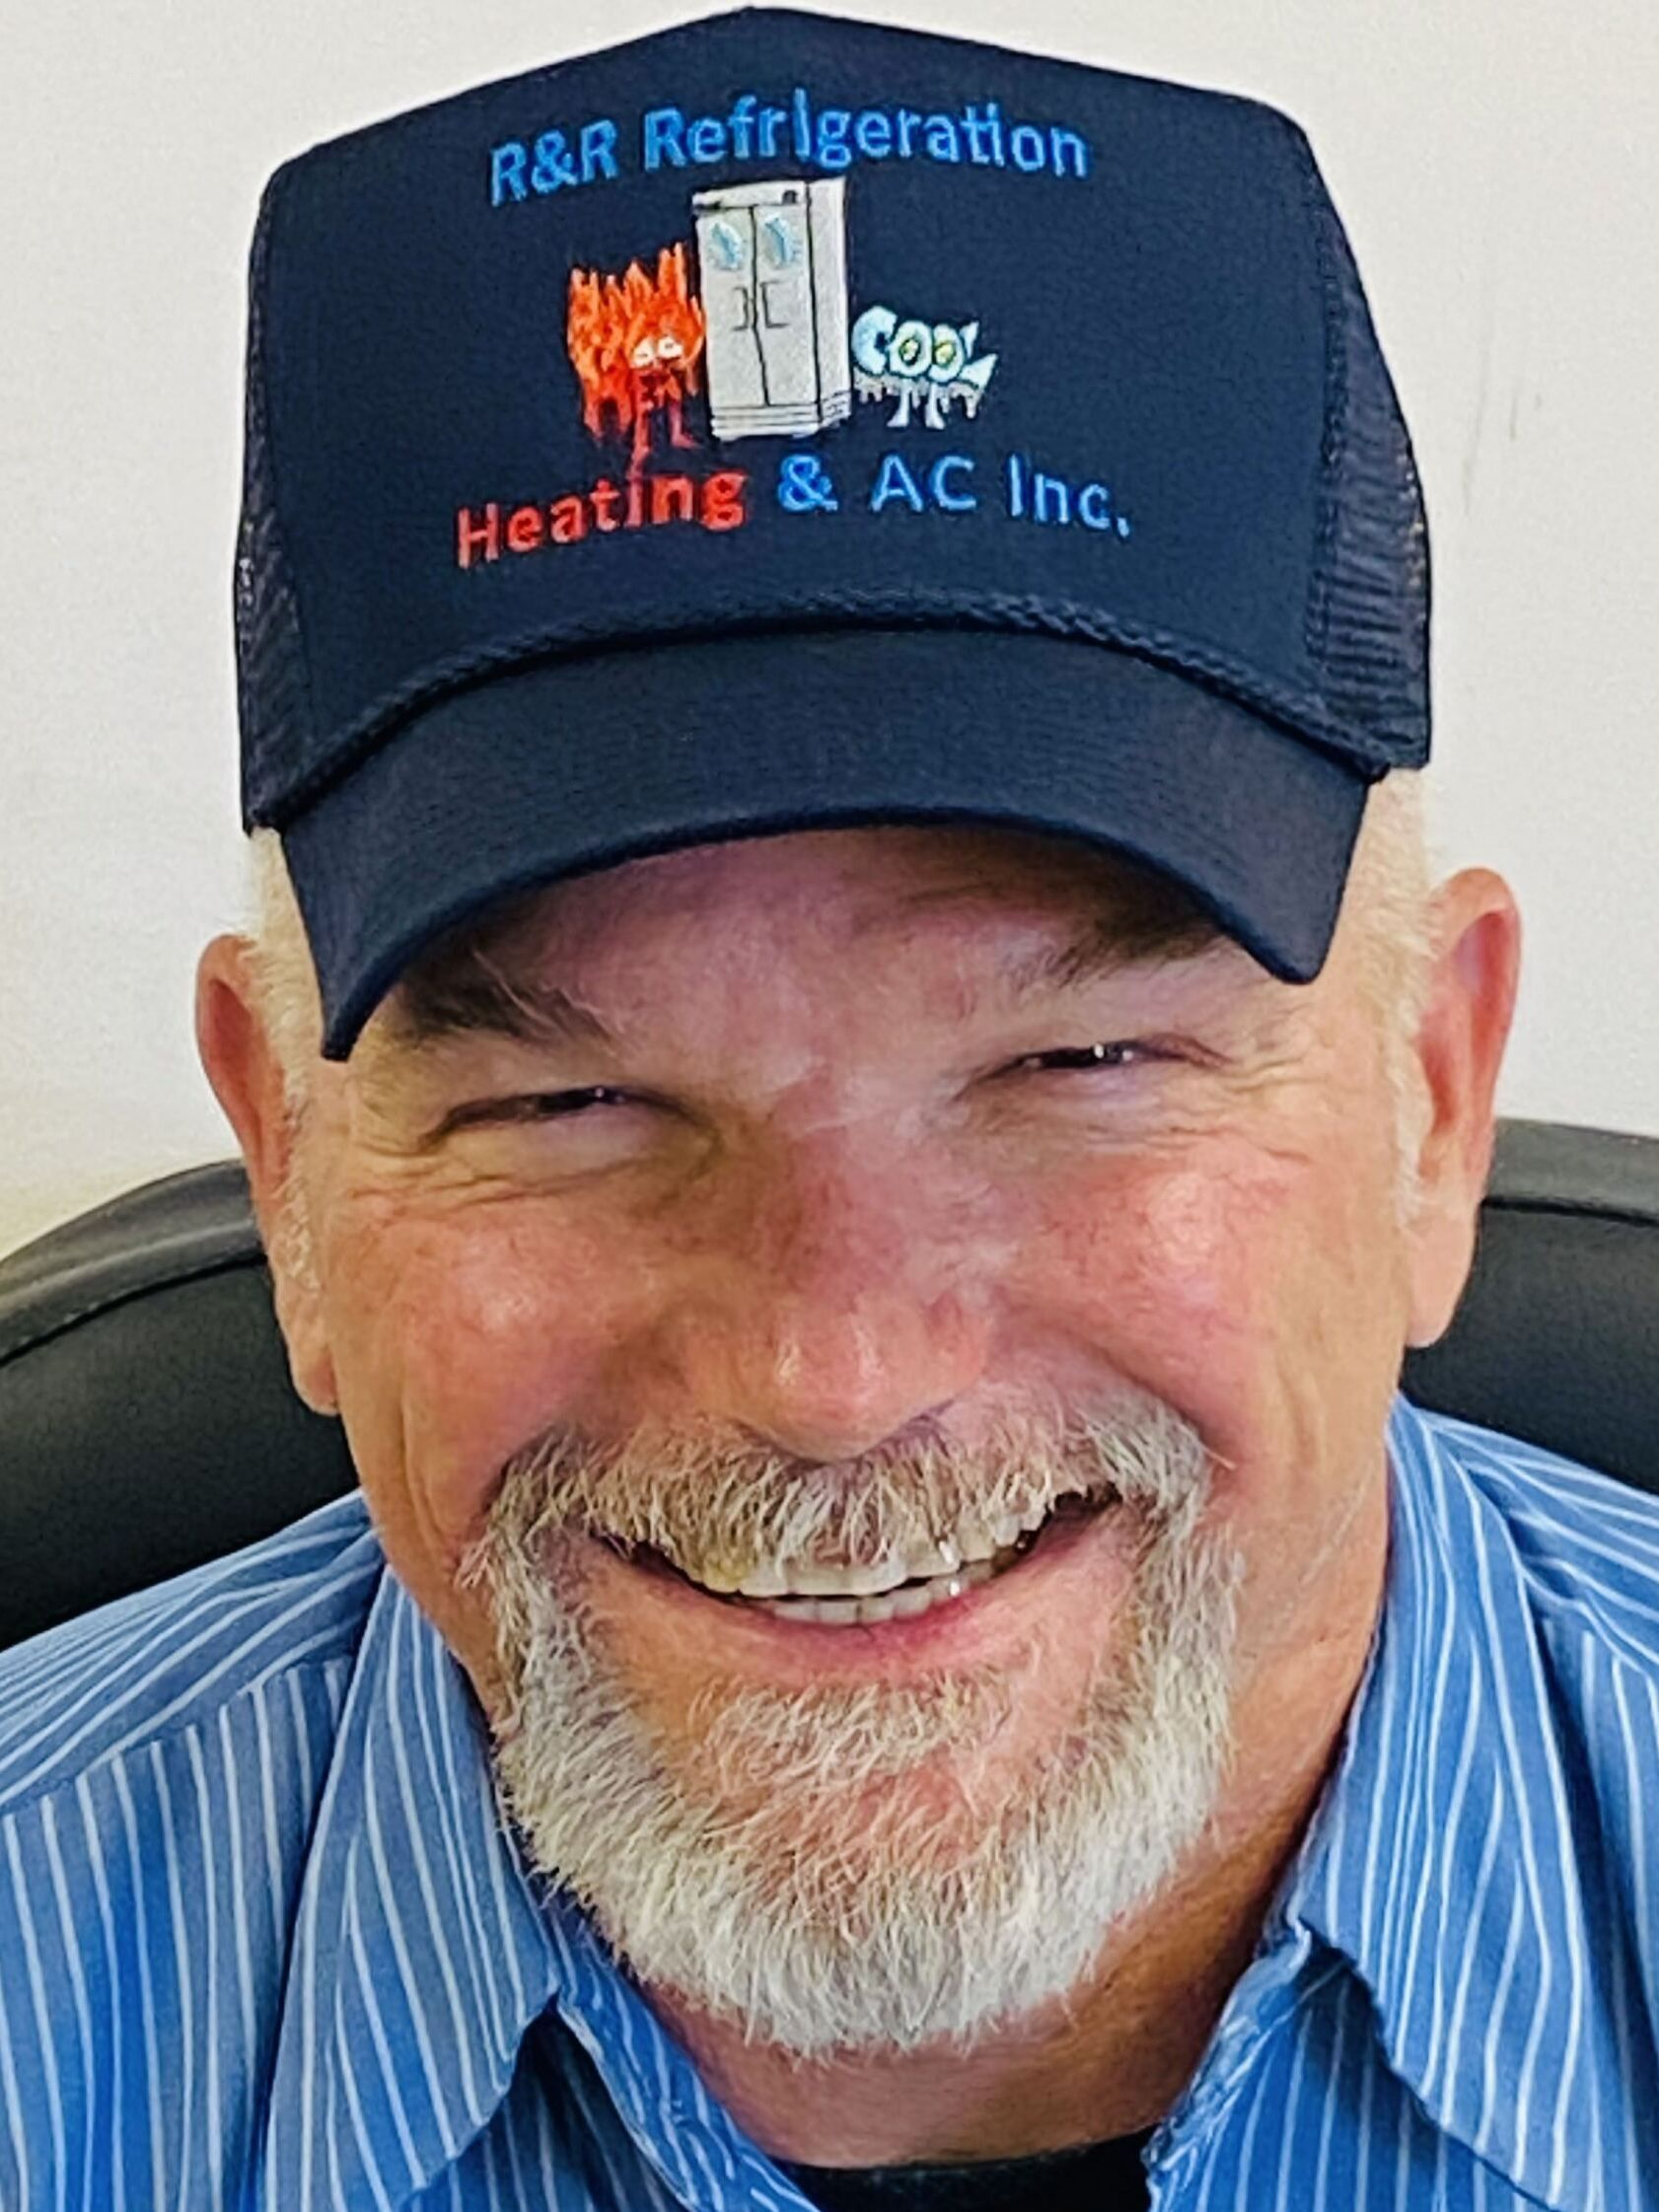 A man with a beard is wearing a hat and smiling.